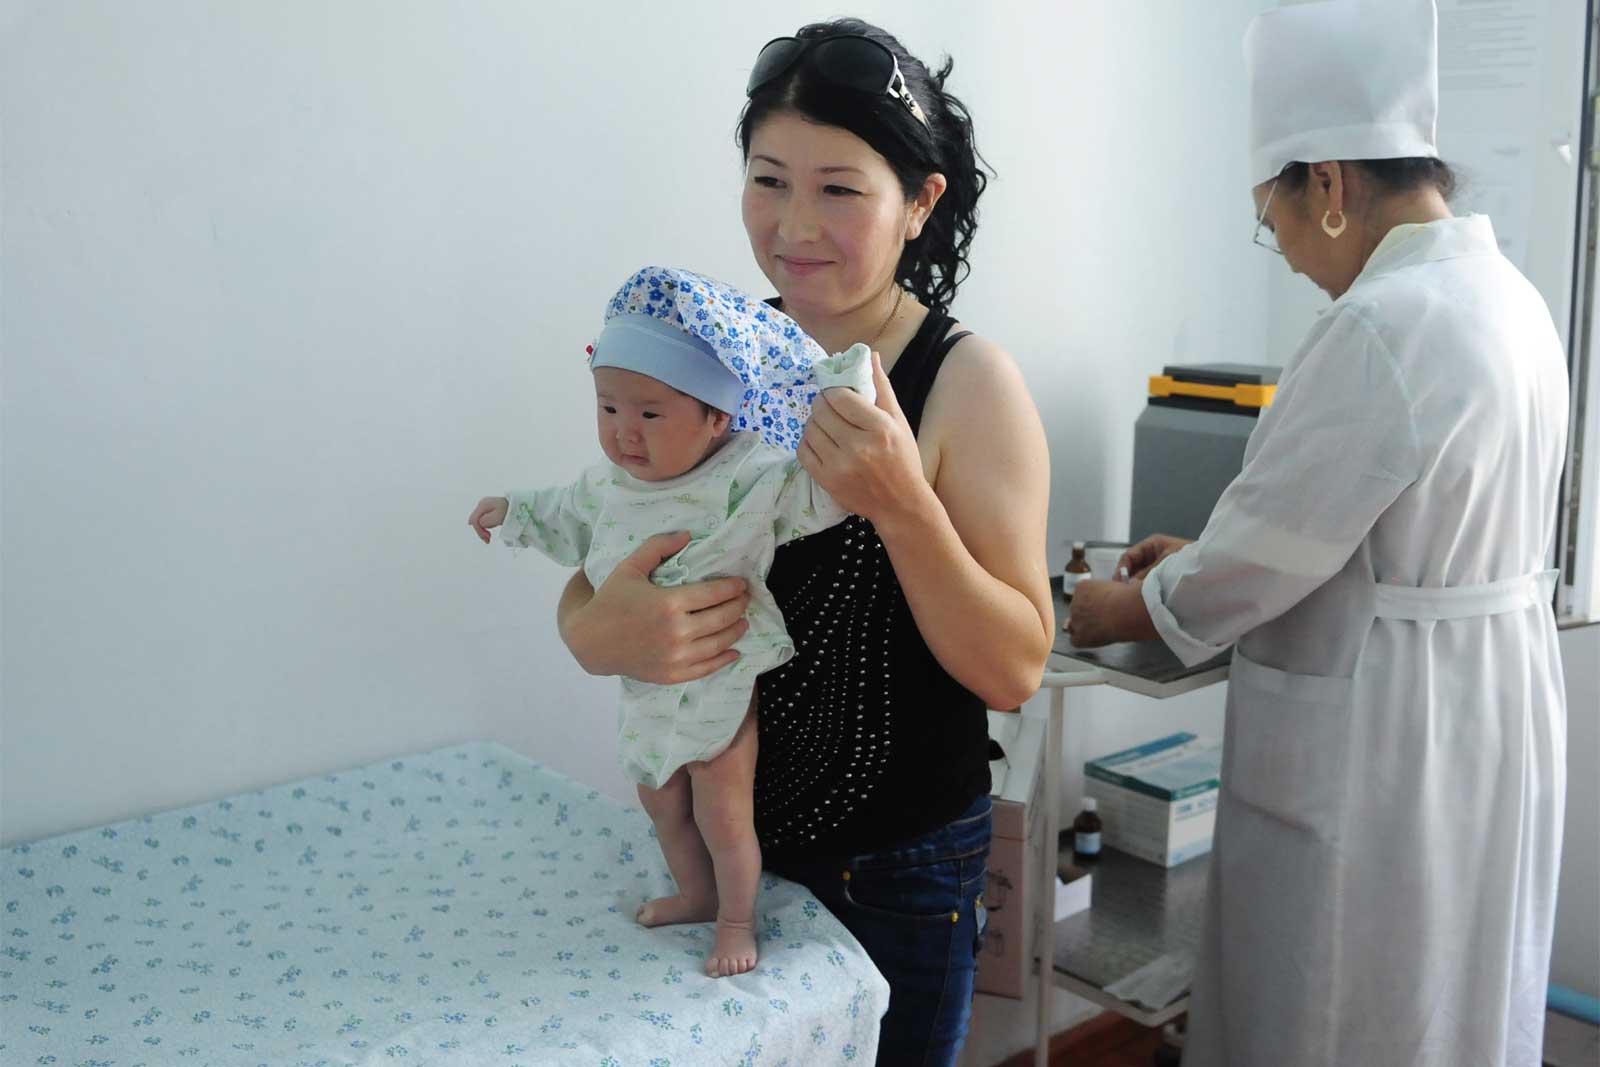  At the Nooken centre, two-month-old Asel’ Sarbayeva gets a welcome distraction in preparation for receiving the five-in-one pentavalent vaccine. The routine use of this vaccine, introduced in 2009 with GAVI support, provides a simpler, less painful way to protect babies against major infectious diseases through a single injection.